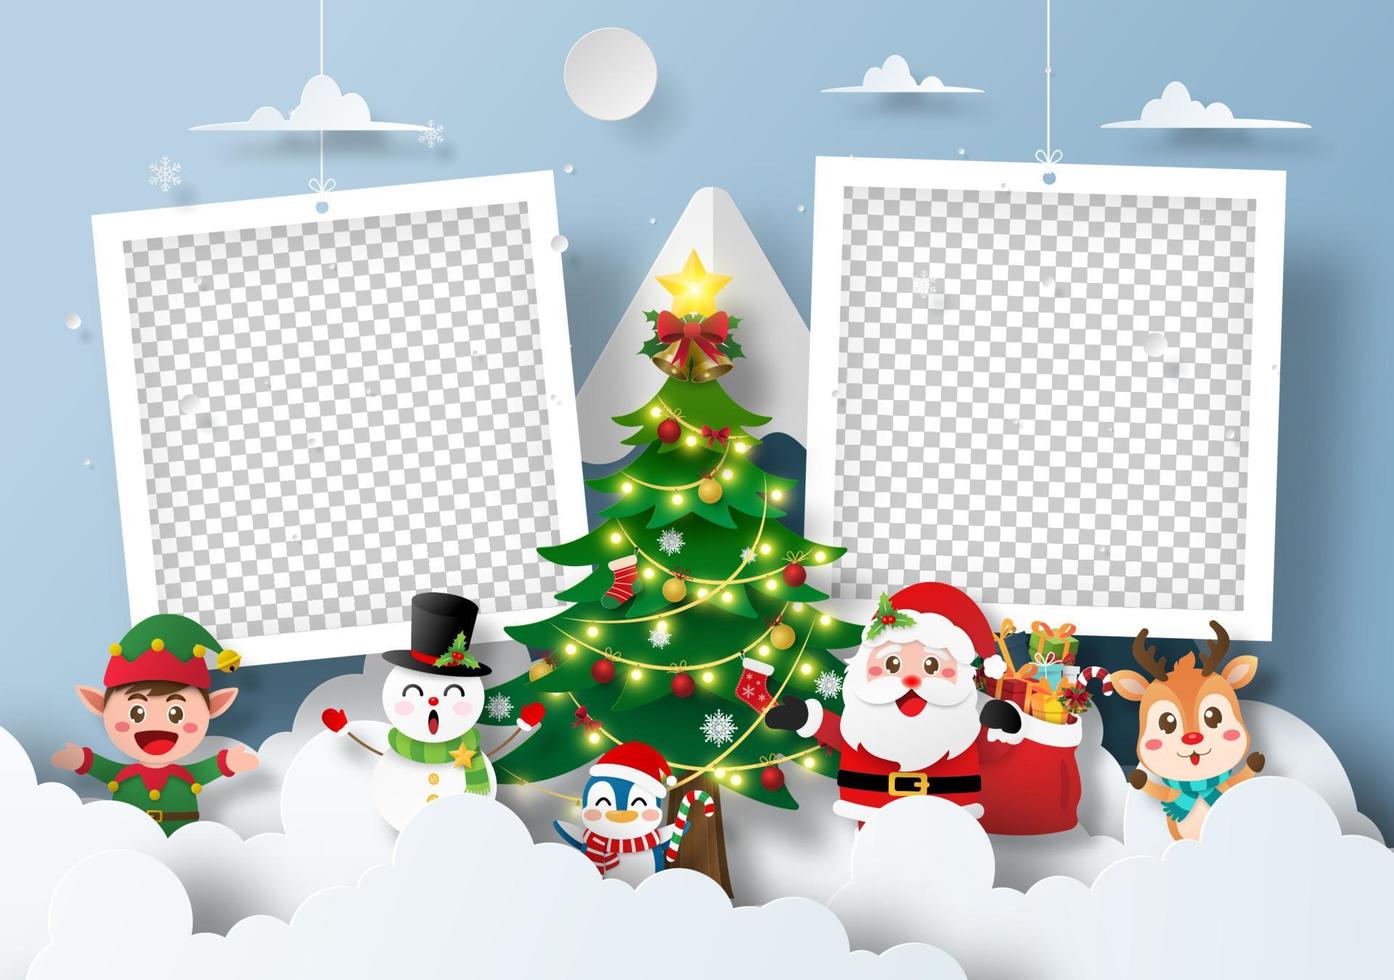 Santa Claus and friend at the snow mountain with blank photo frame vector